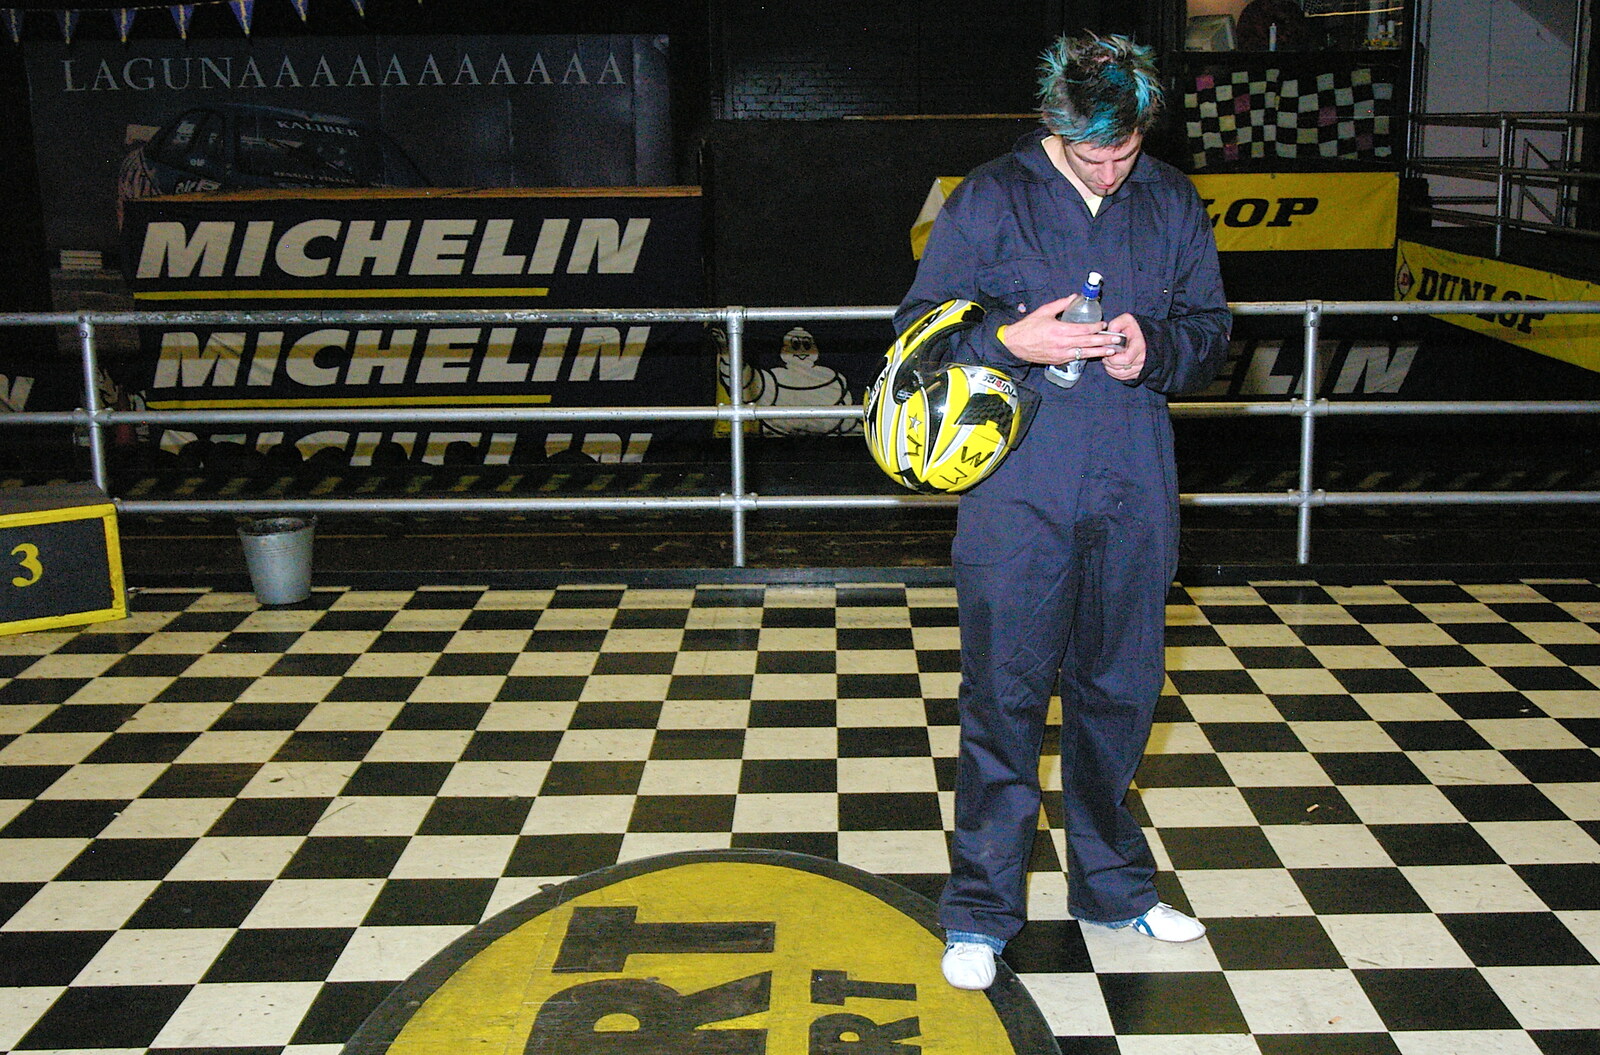 Rob checks his phone from Qualcomm goes Karting in Caxton, Cambridgeshire - 7th November 2005